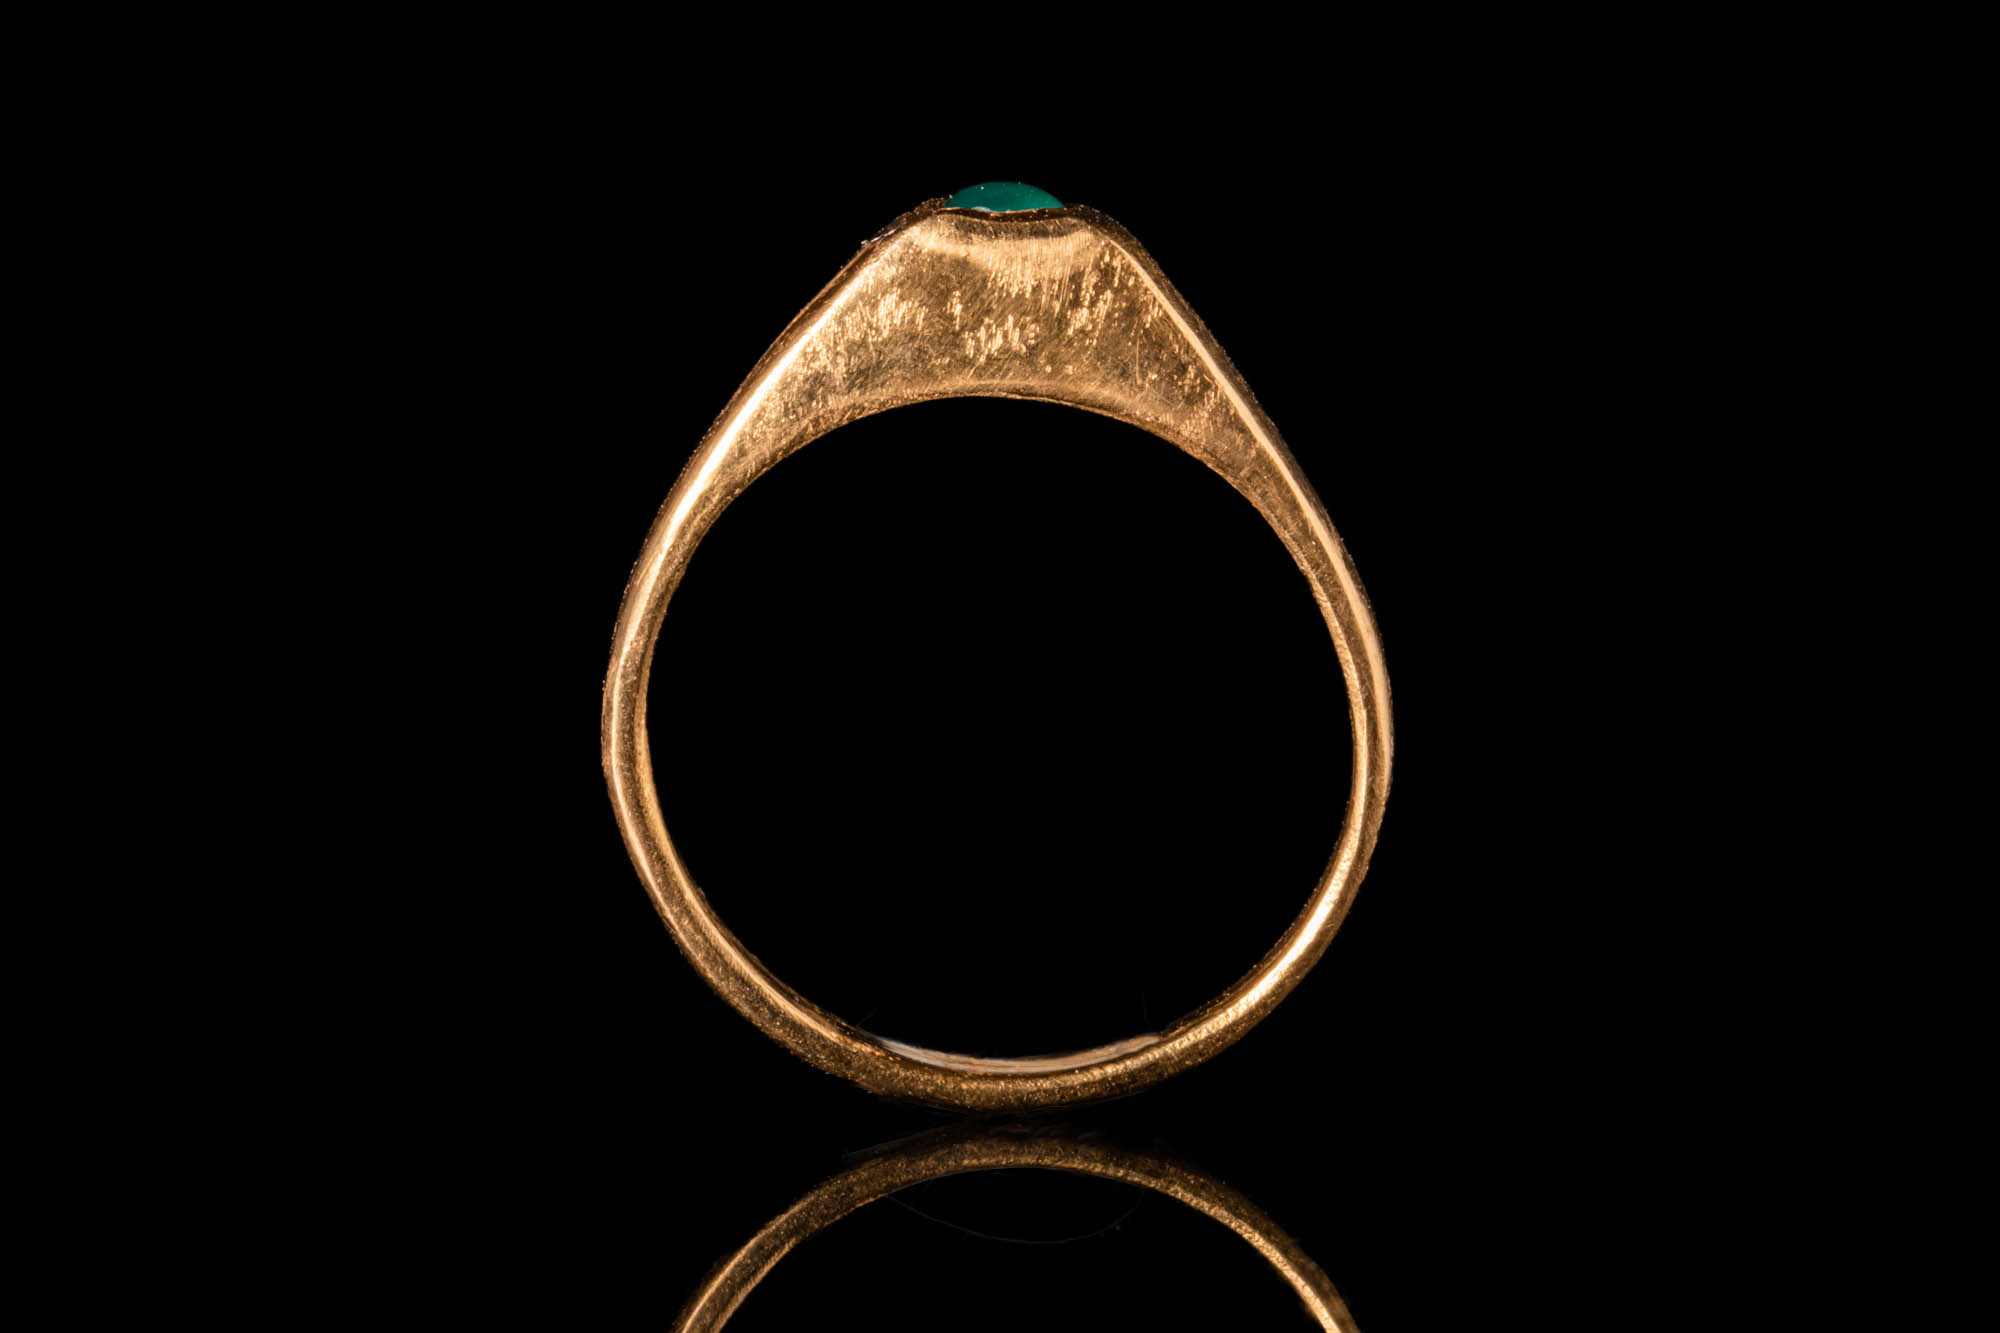 HEAVY MEDIEVAL GOLD STIRRUP RING WITH GREEN CHALCEDONY - Image 5 of 5